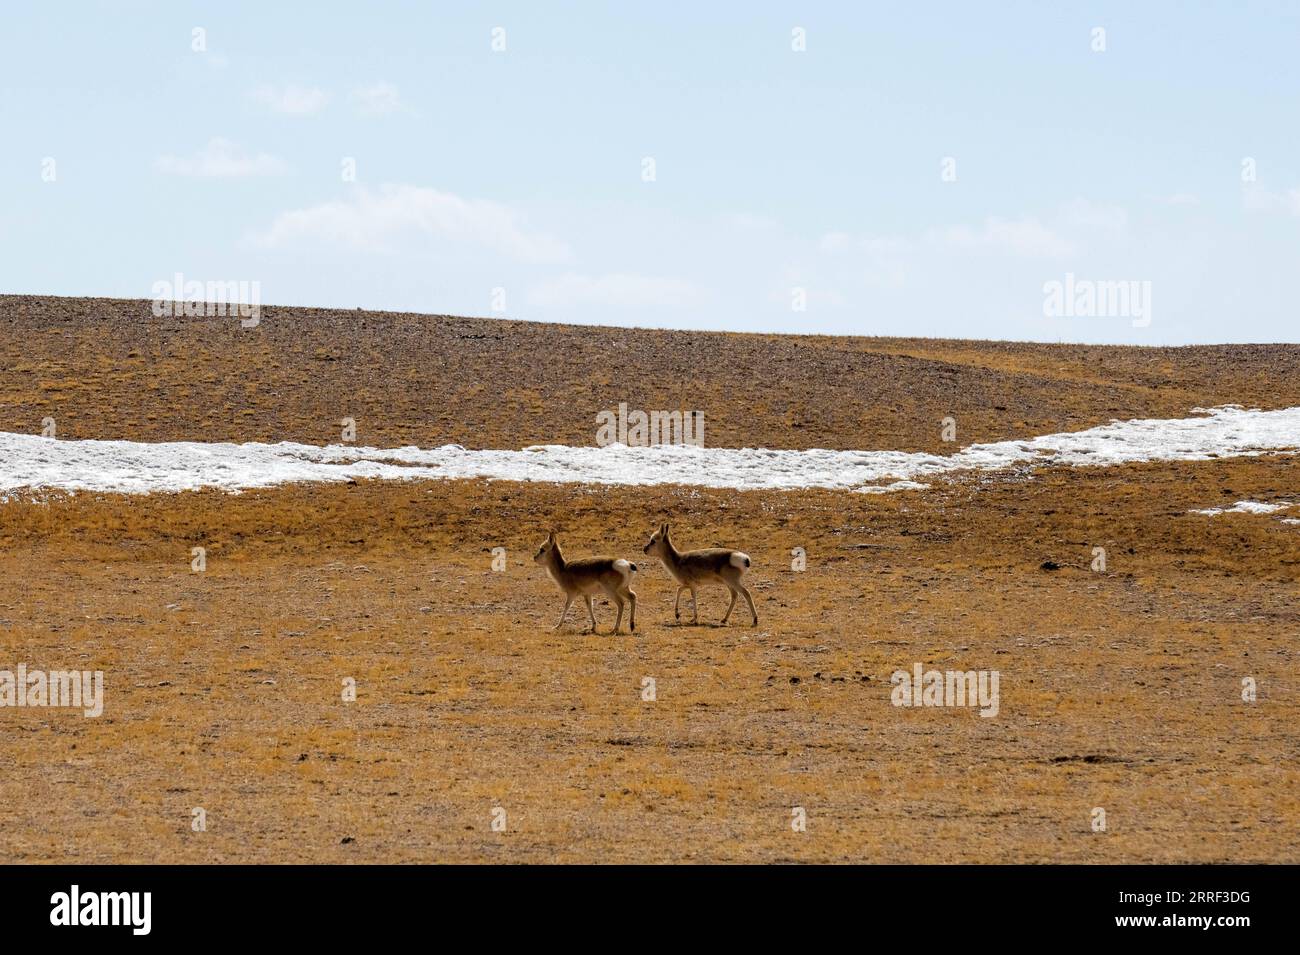 220326 -- NAGQU, March 26, 2022 -- Tibetan antelopes are seen in Nagqu of southwest China s Tibet Autonomous Region, March 25, 2022. Tibet Autonomous Region in southwest China has become an ideal habitat for wild animals over the years amid the region s thriving biodiversity protection endeavors. Tibet has seen a steady increase in endangered wildlife population, thanks to its continuous efforts over the past decades.  InTibet CHINA-TIBET-NAGQU-WILD ANIMAL CN WangxZehao PUBLICATIONxNOTxINxCHN Stock Photo